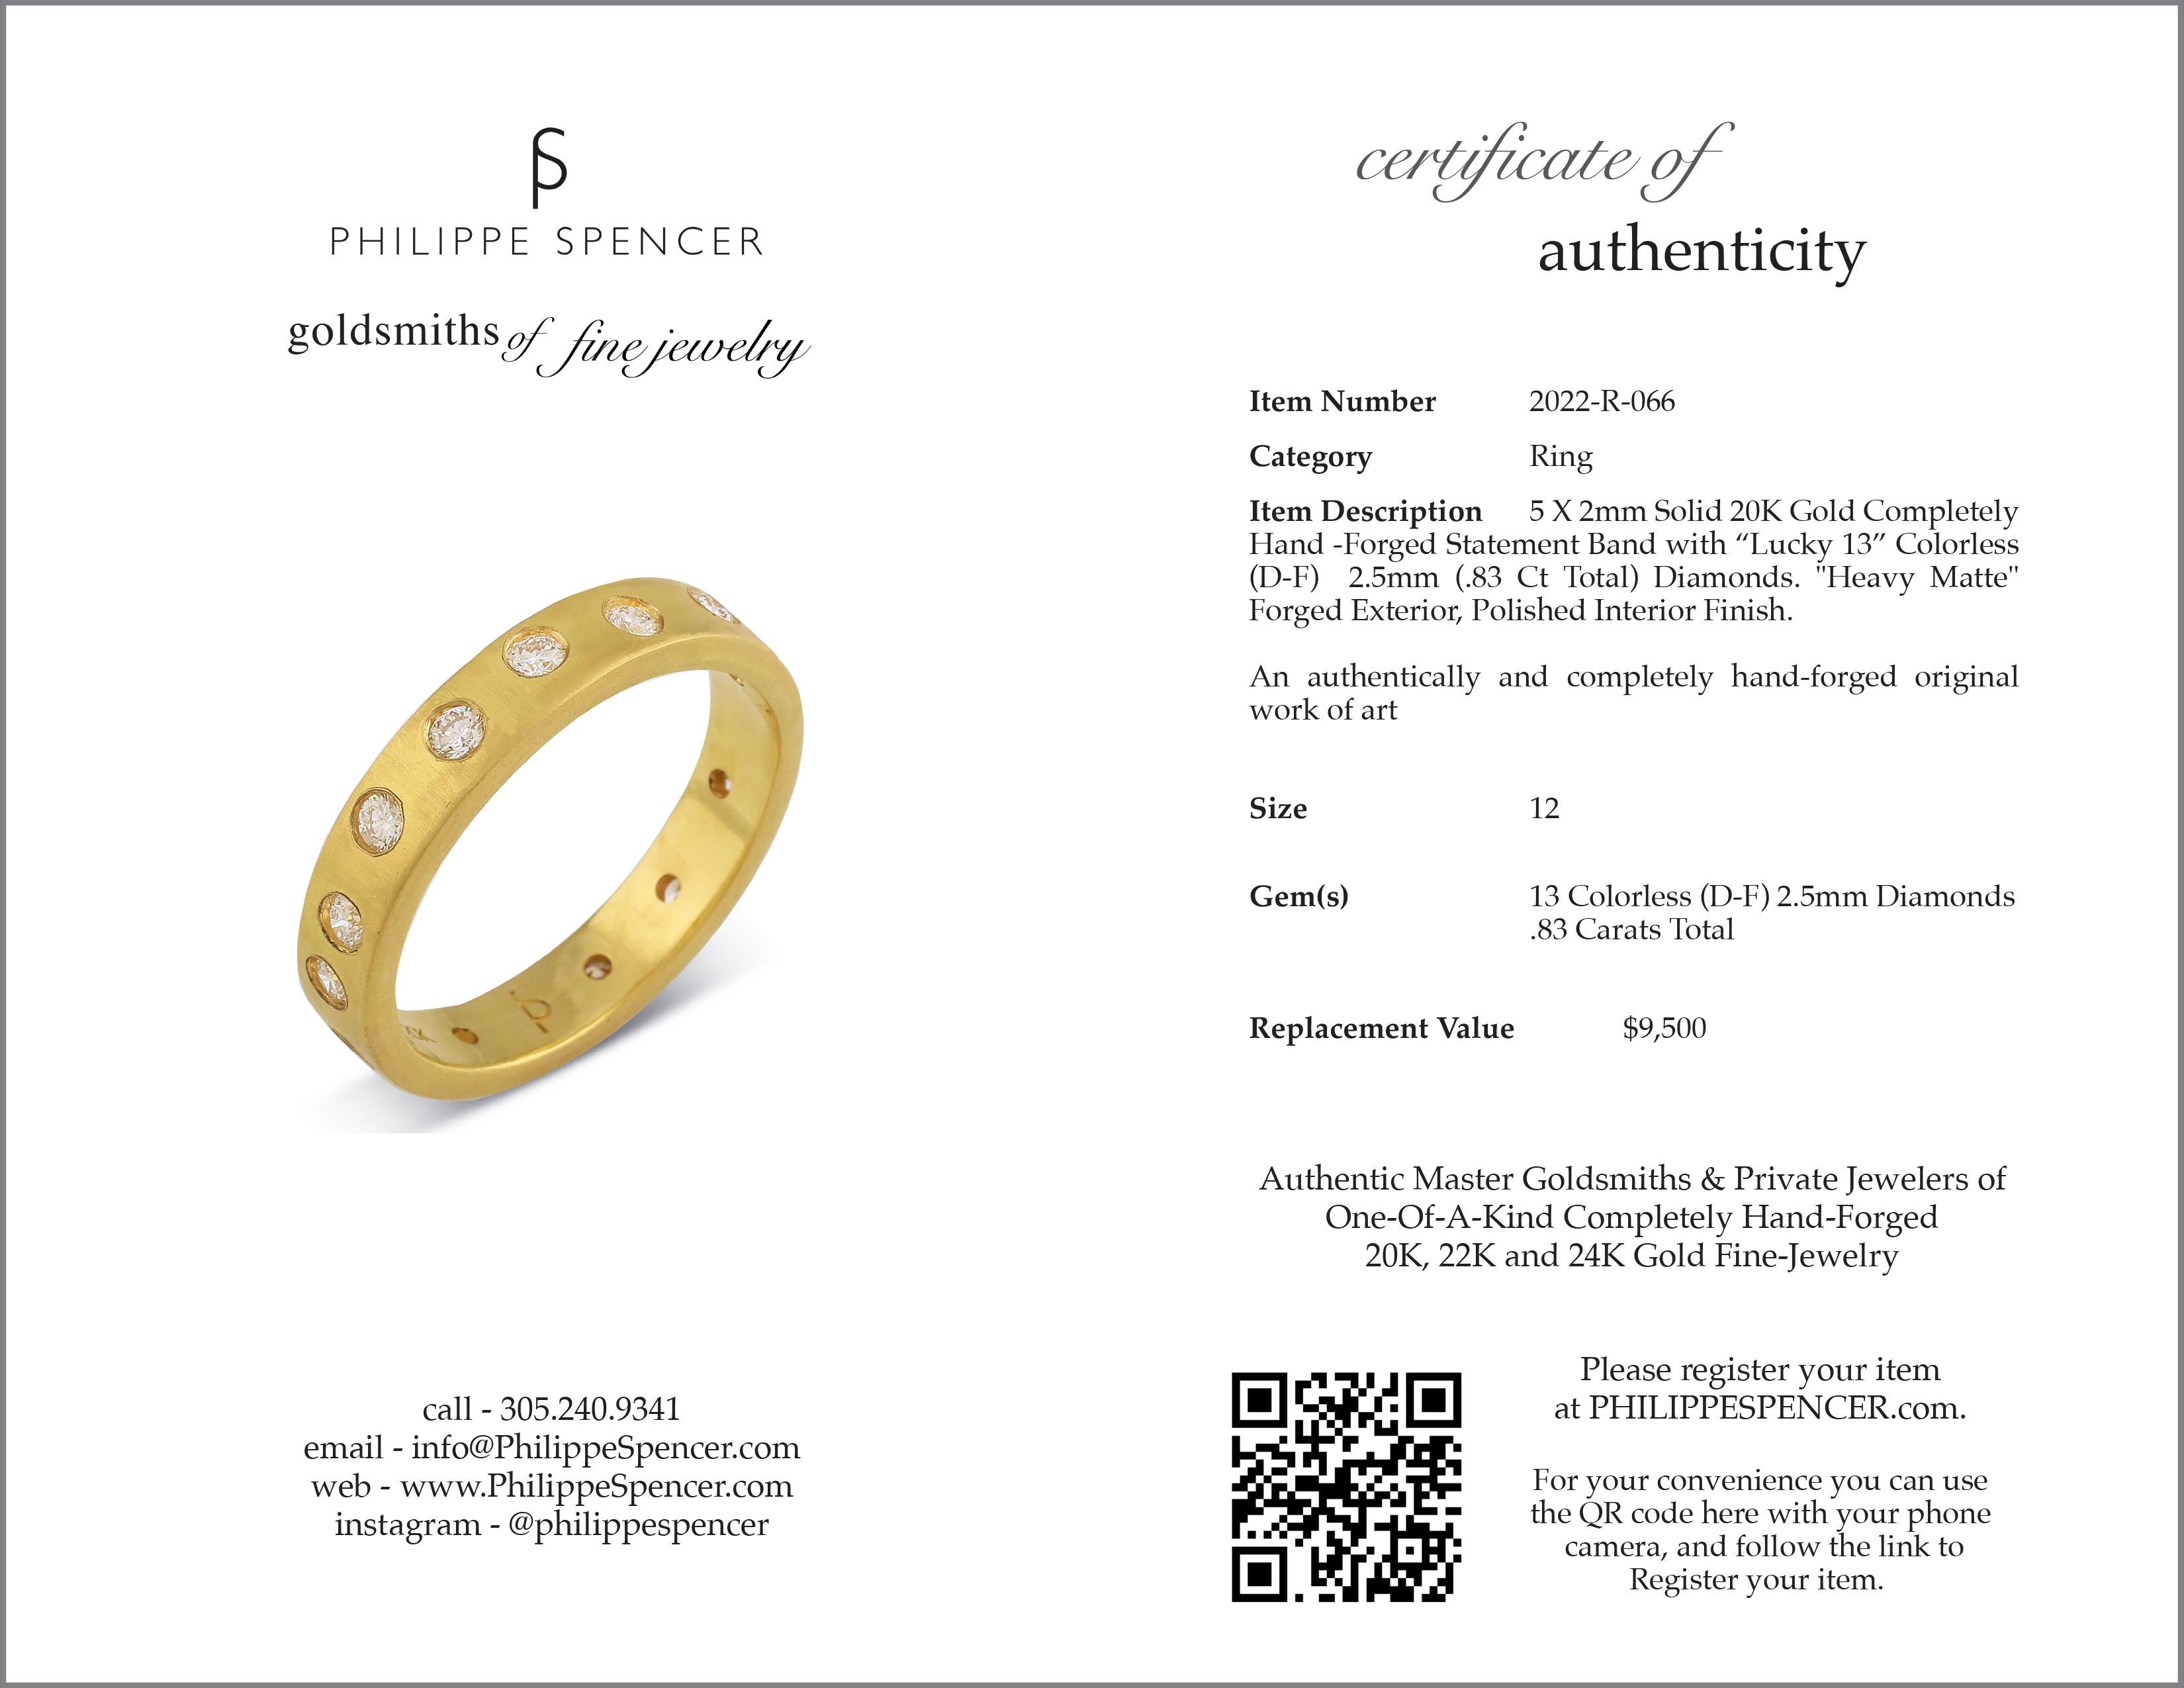 For Sale:  PHILIPPE SPENCER 20K Gold 5x2mm Band & “Lucky 13” COLORLESS Diamonds  5